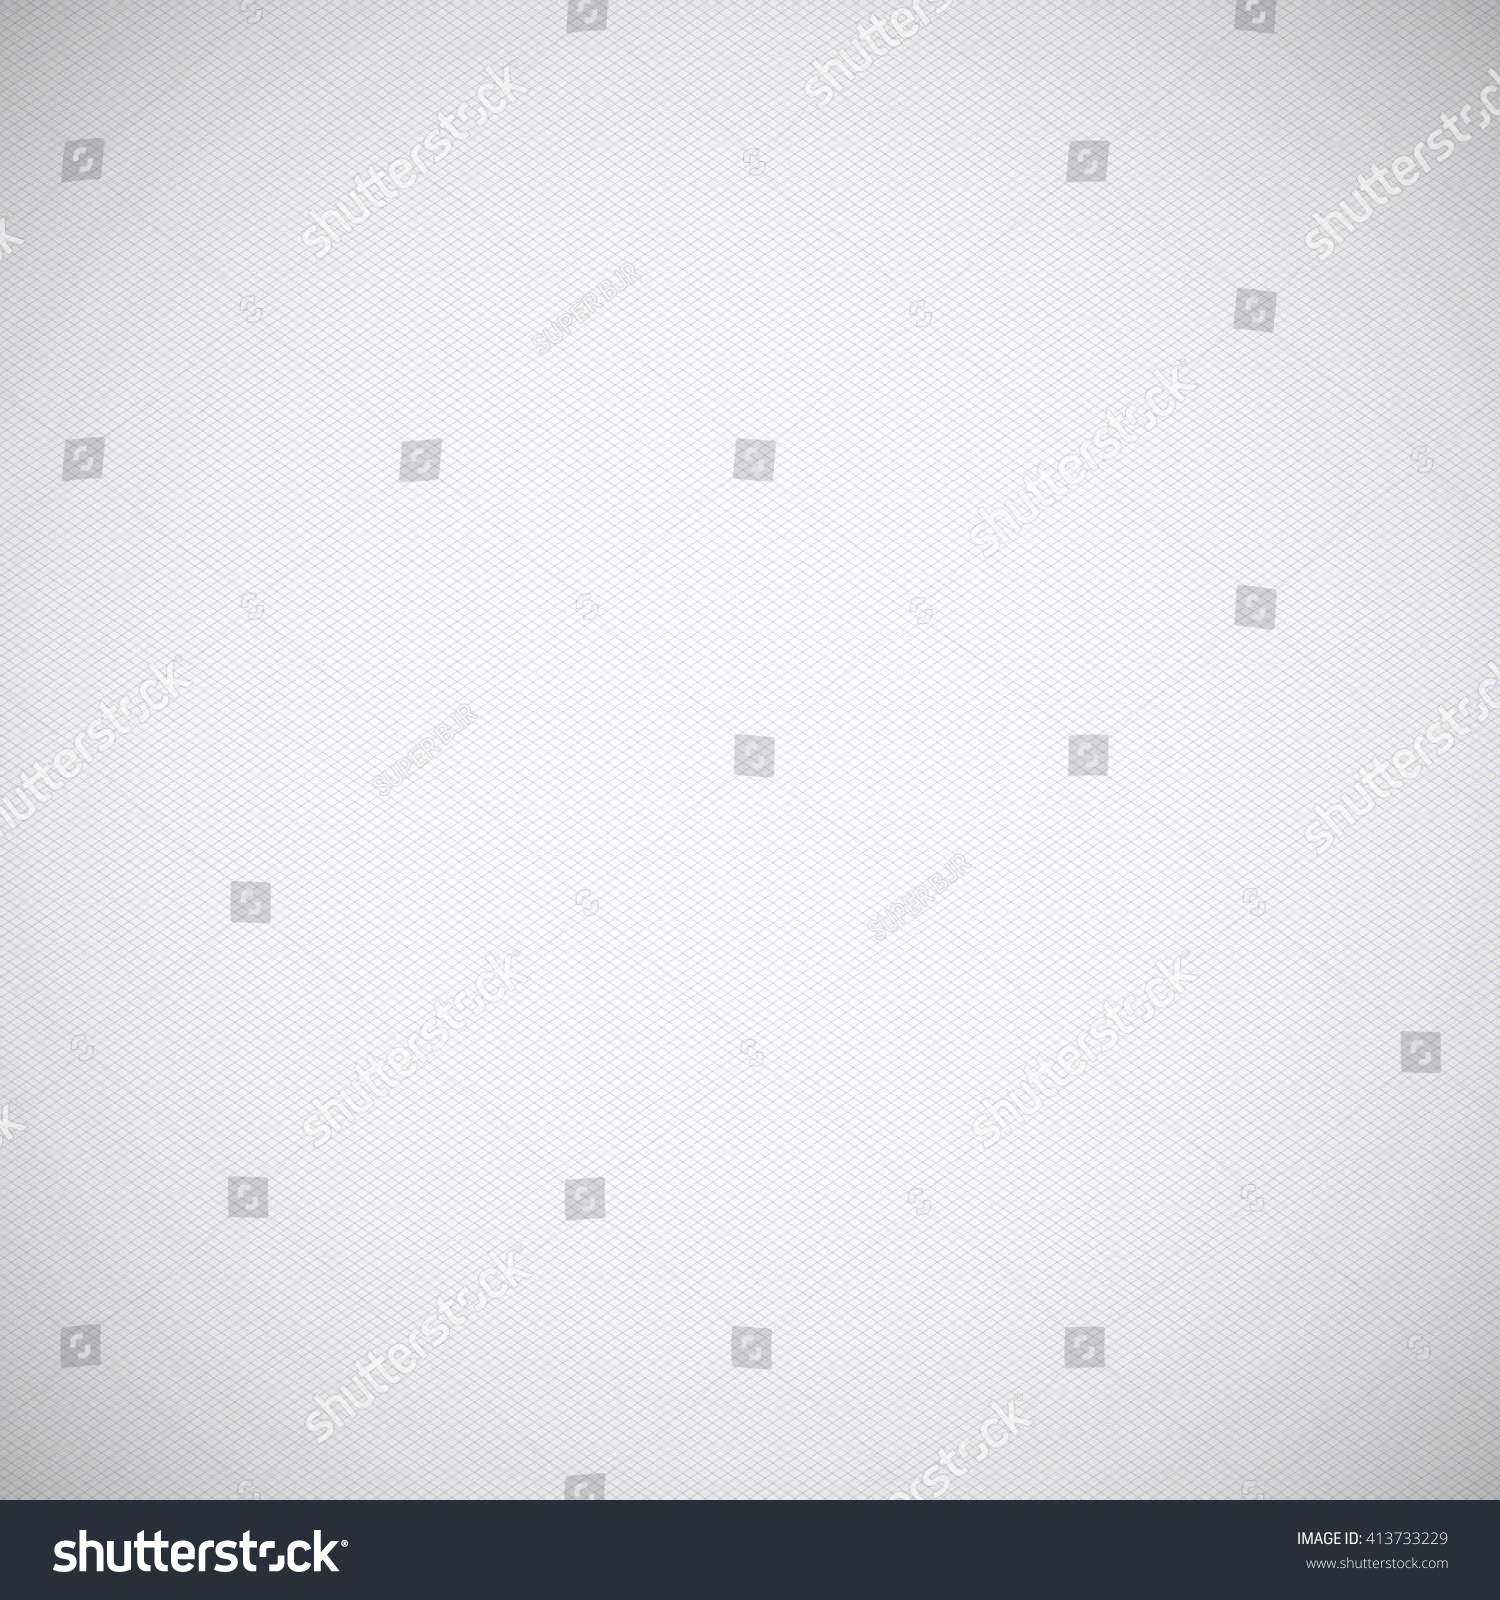 Striped White Texture, Seamless Vector Background - 413733229